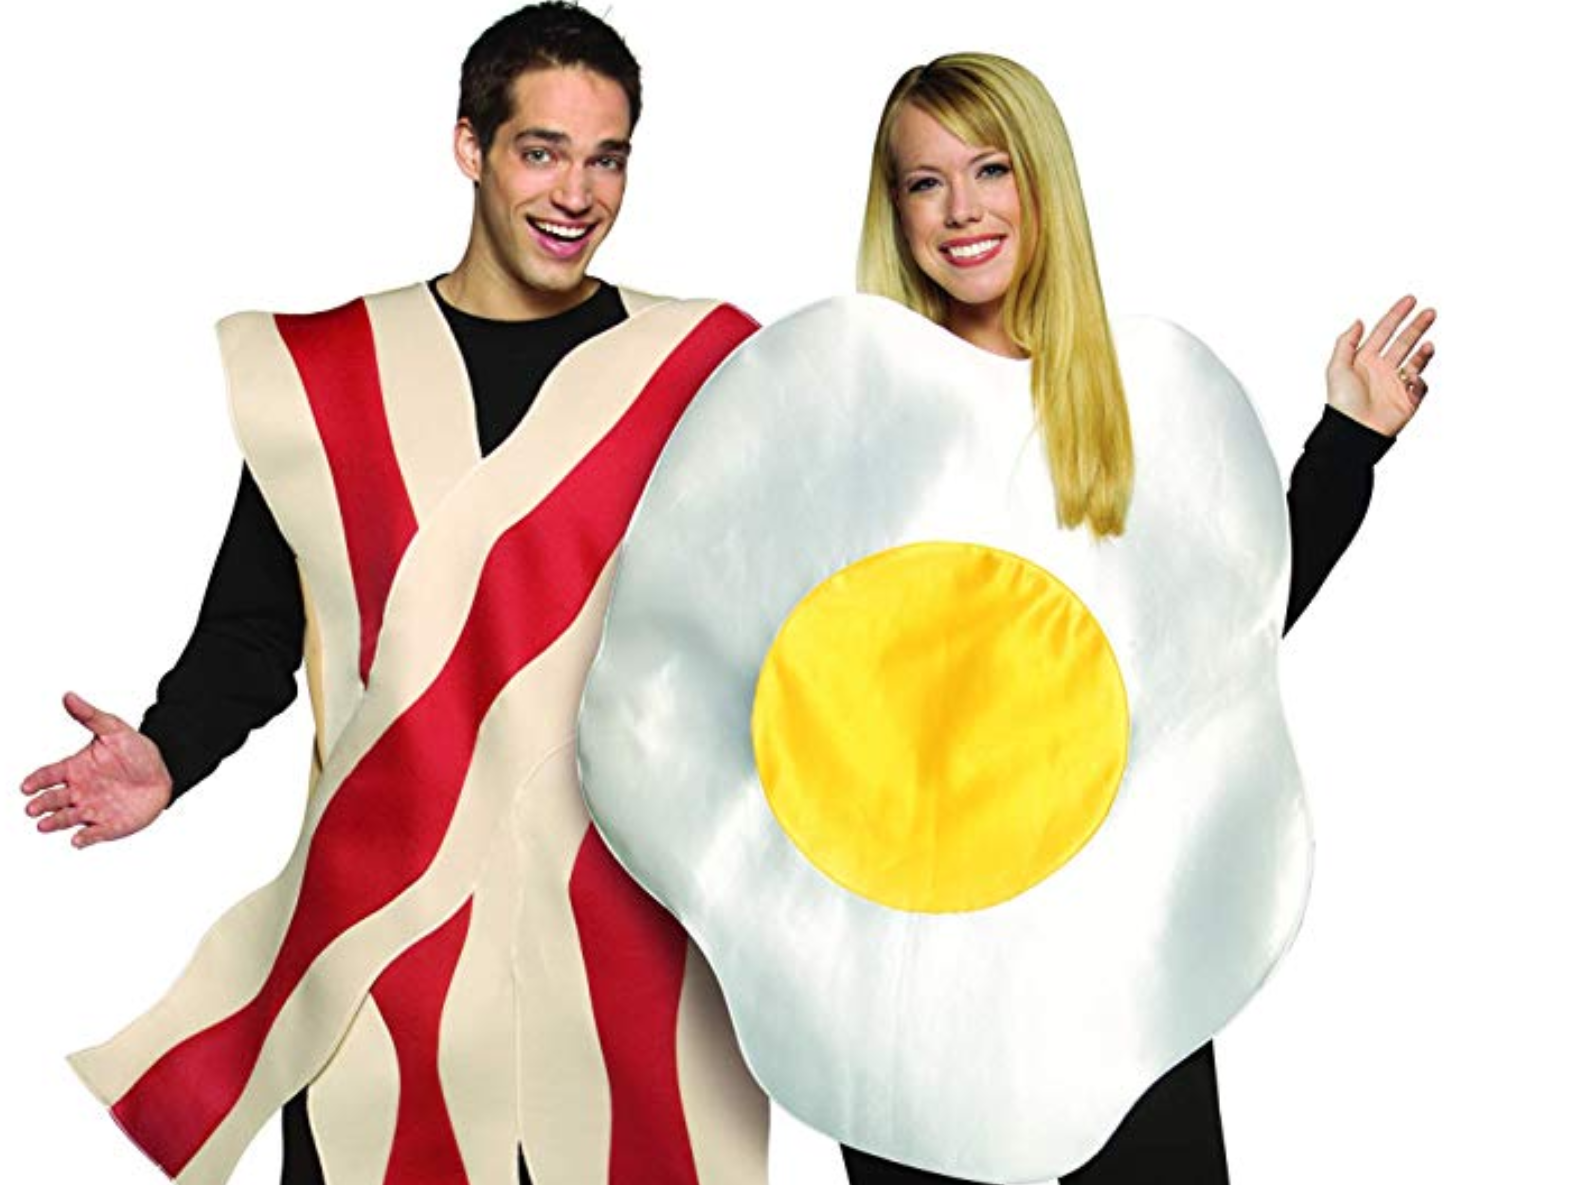 Halloween Food Costumes That Perfectly Combine Spooky And Delicious